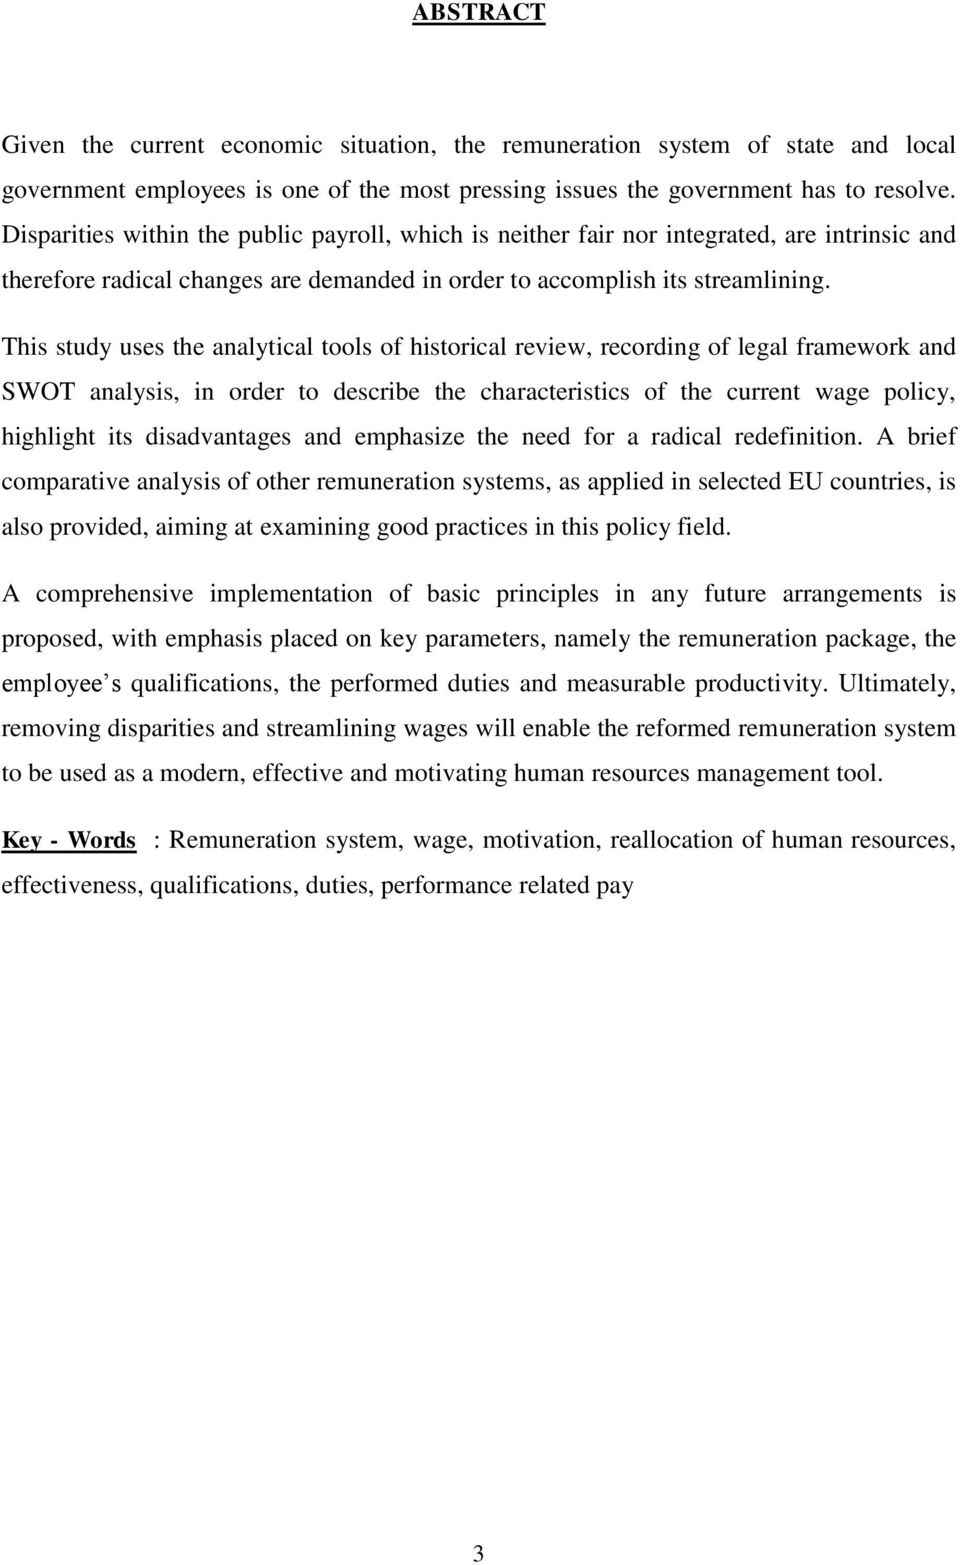 This study uses the analytical tools of historical review, recording of legal framework and SWOT analysis, in order to describe the characteristics of the current wage policy, highlight its